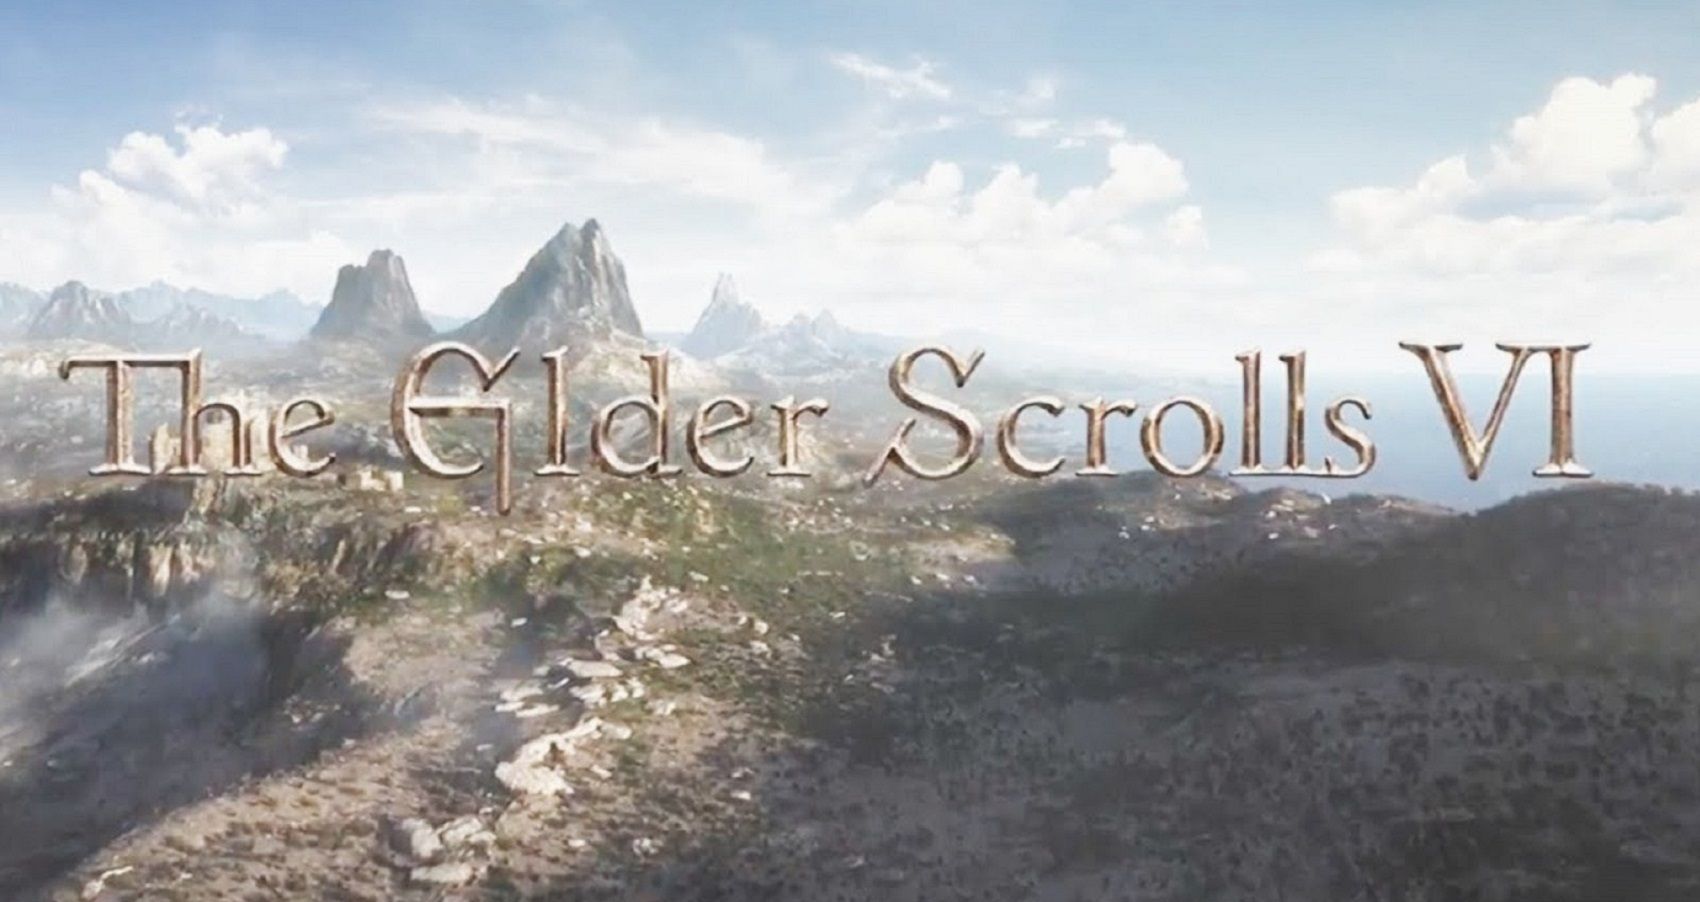 What The Elder Scrolls 6 Can Learn from TES Online